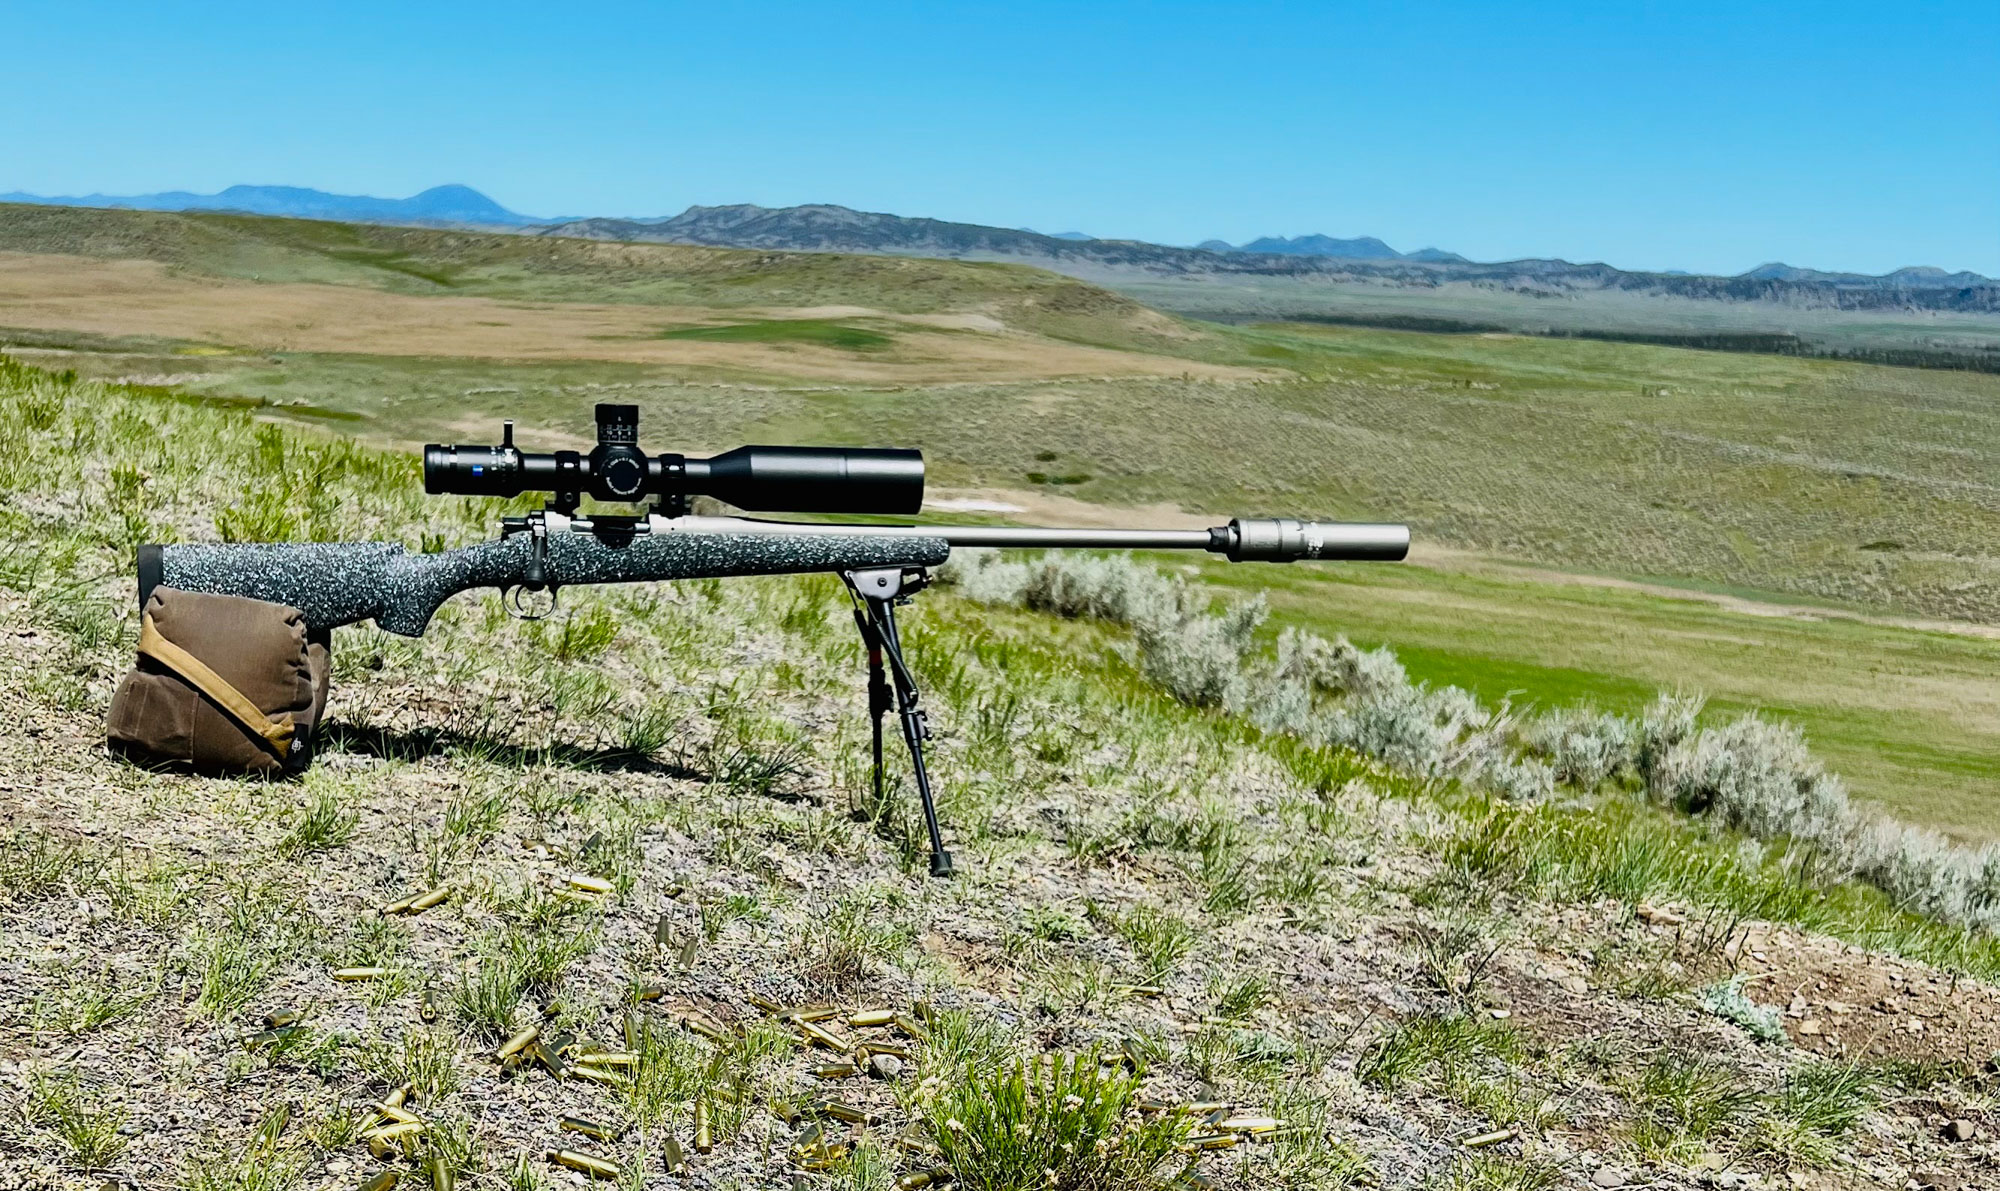 Varmint rifle perched on a hill in Montana